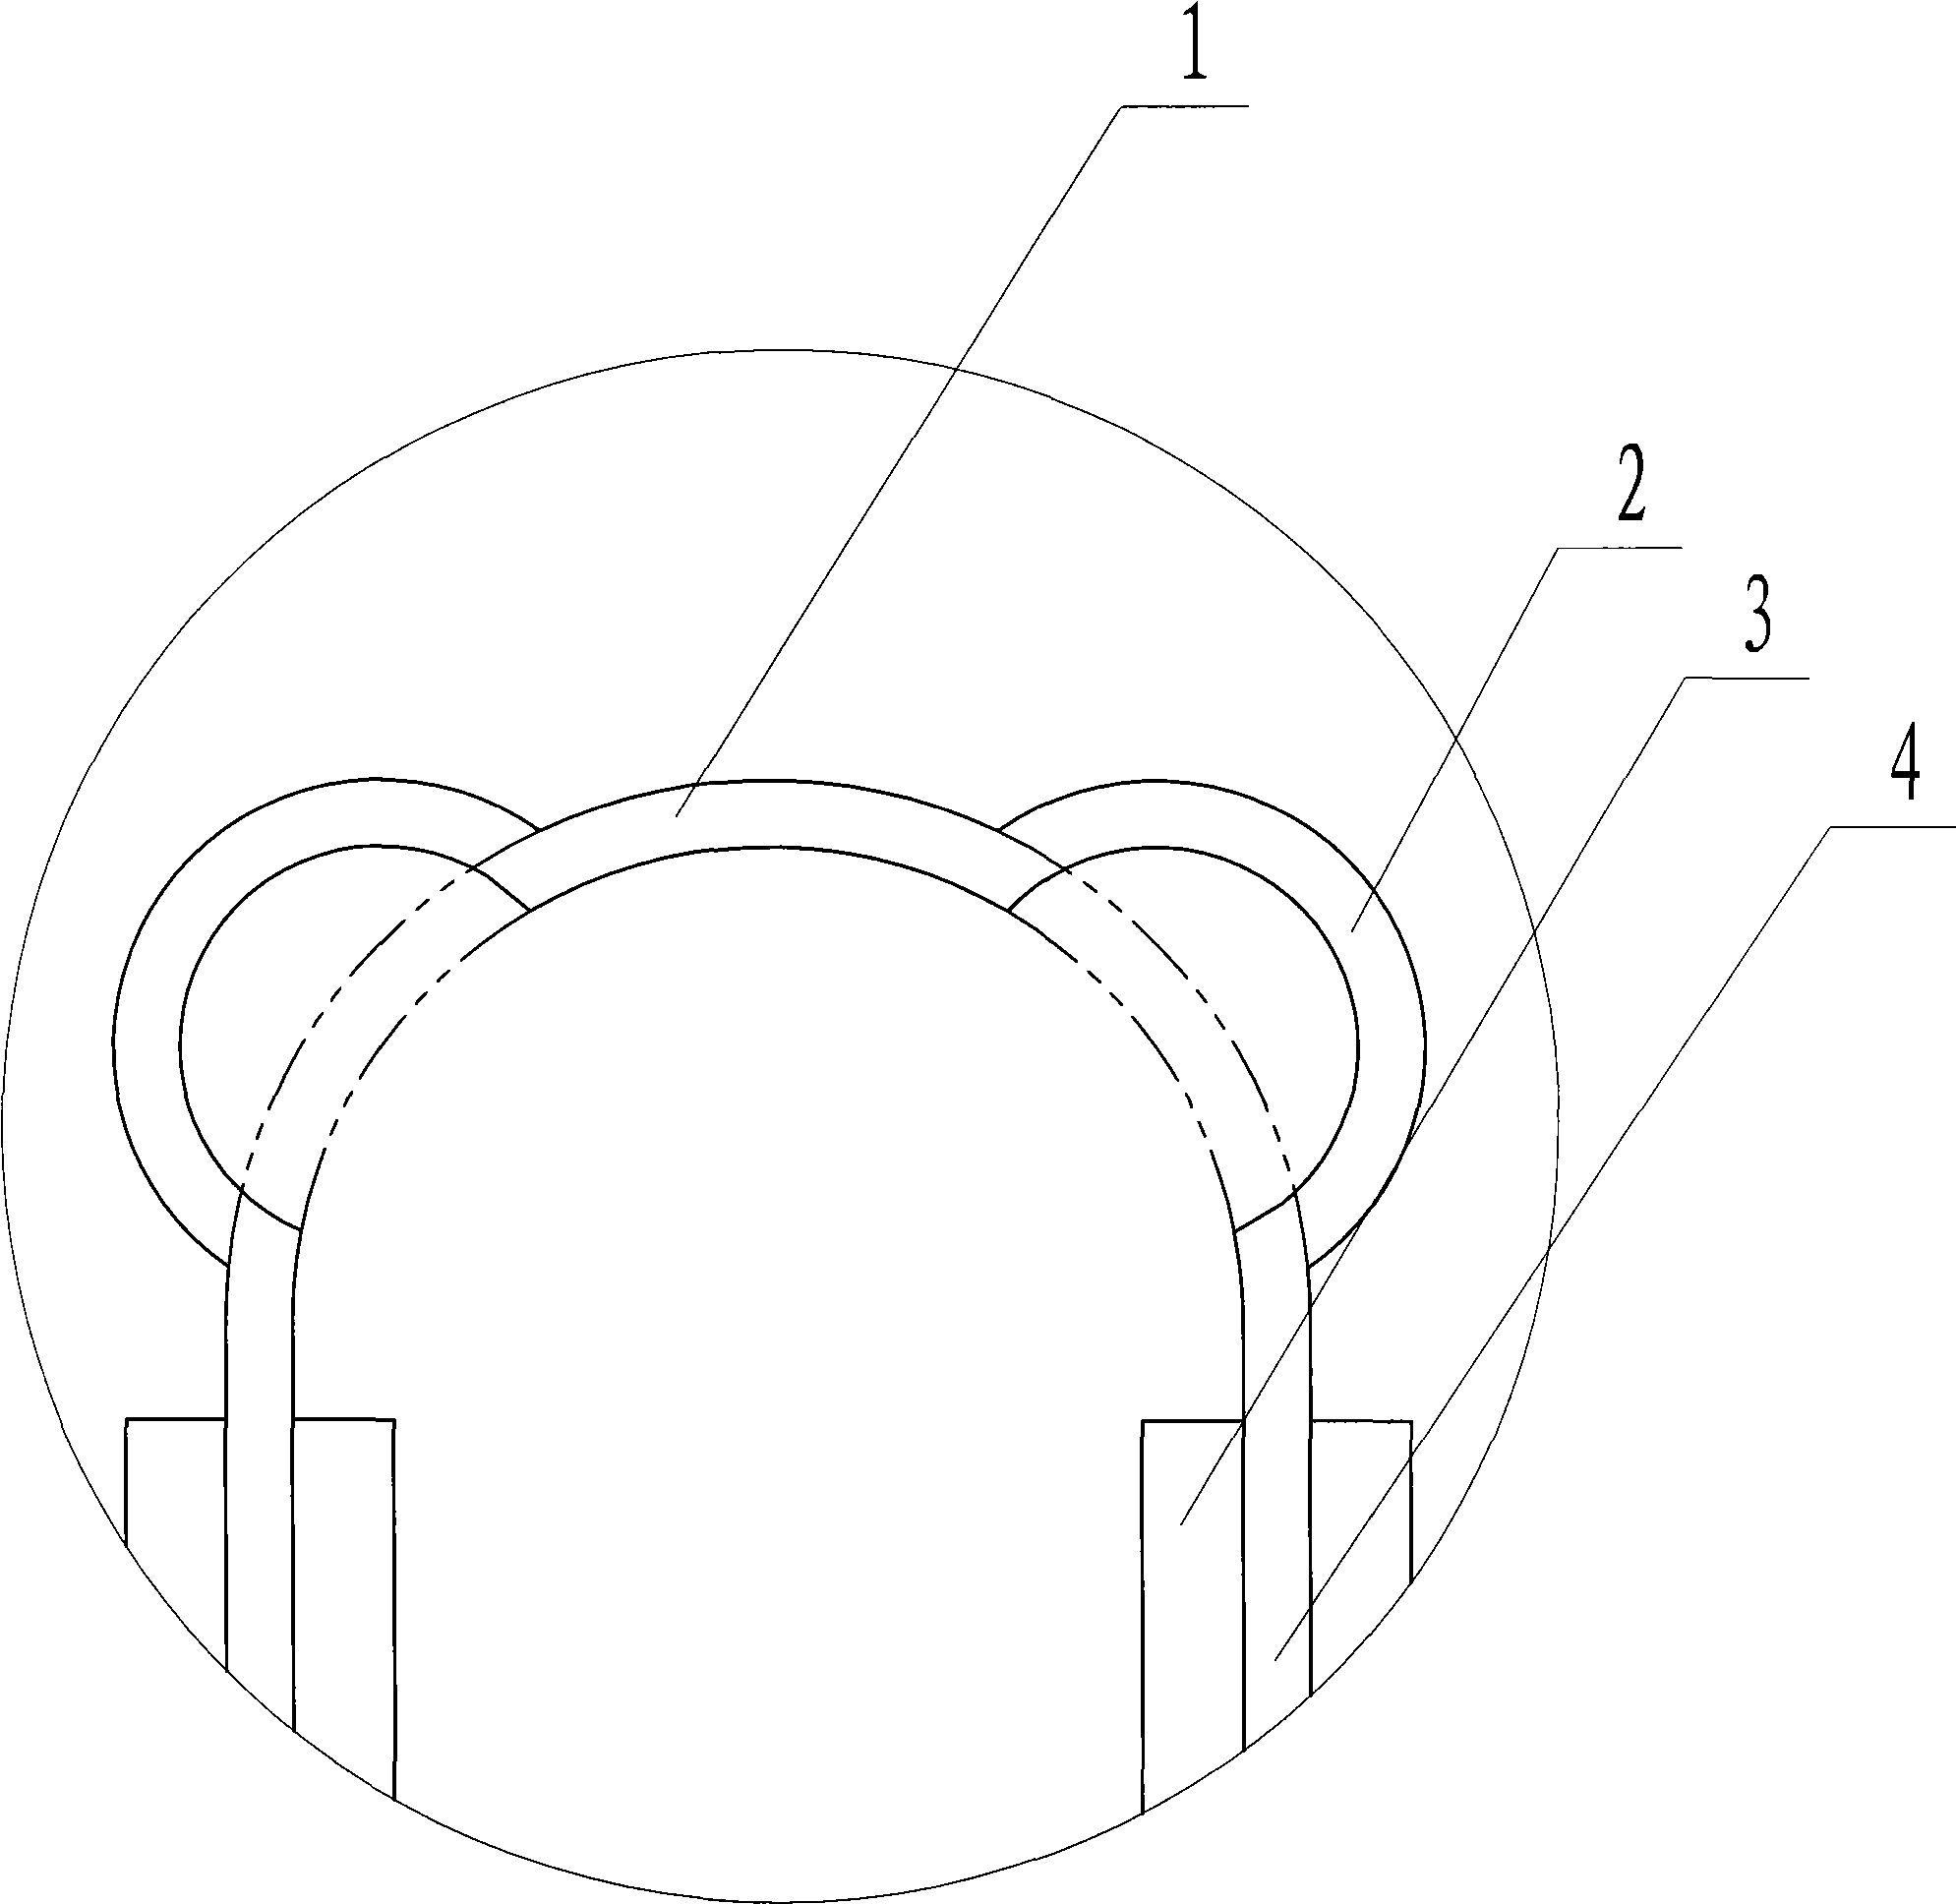 Fin structure for air-conditioning evaporators